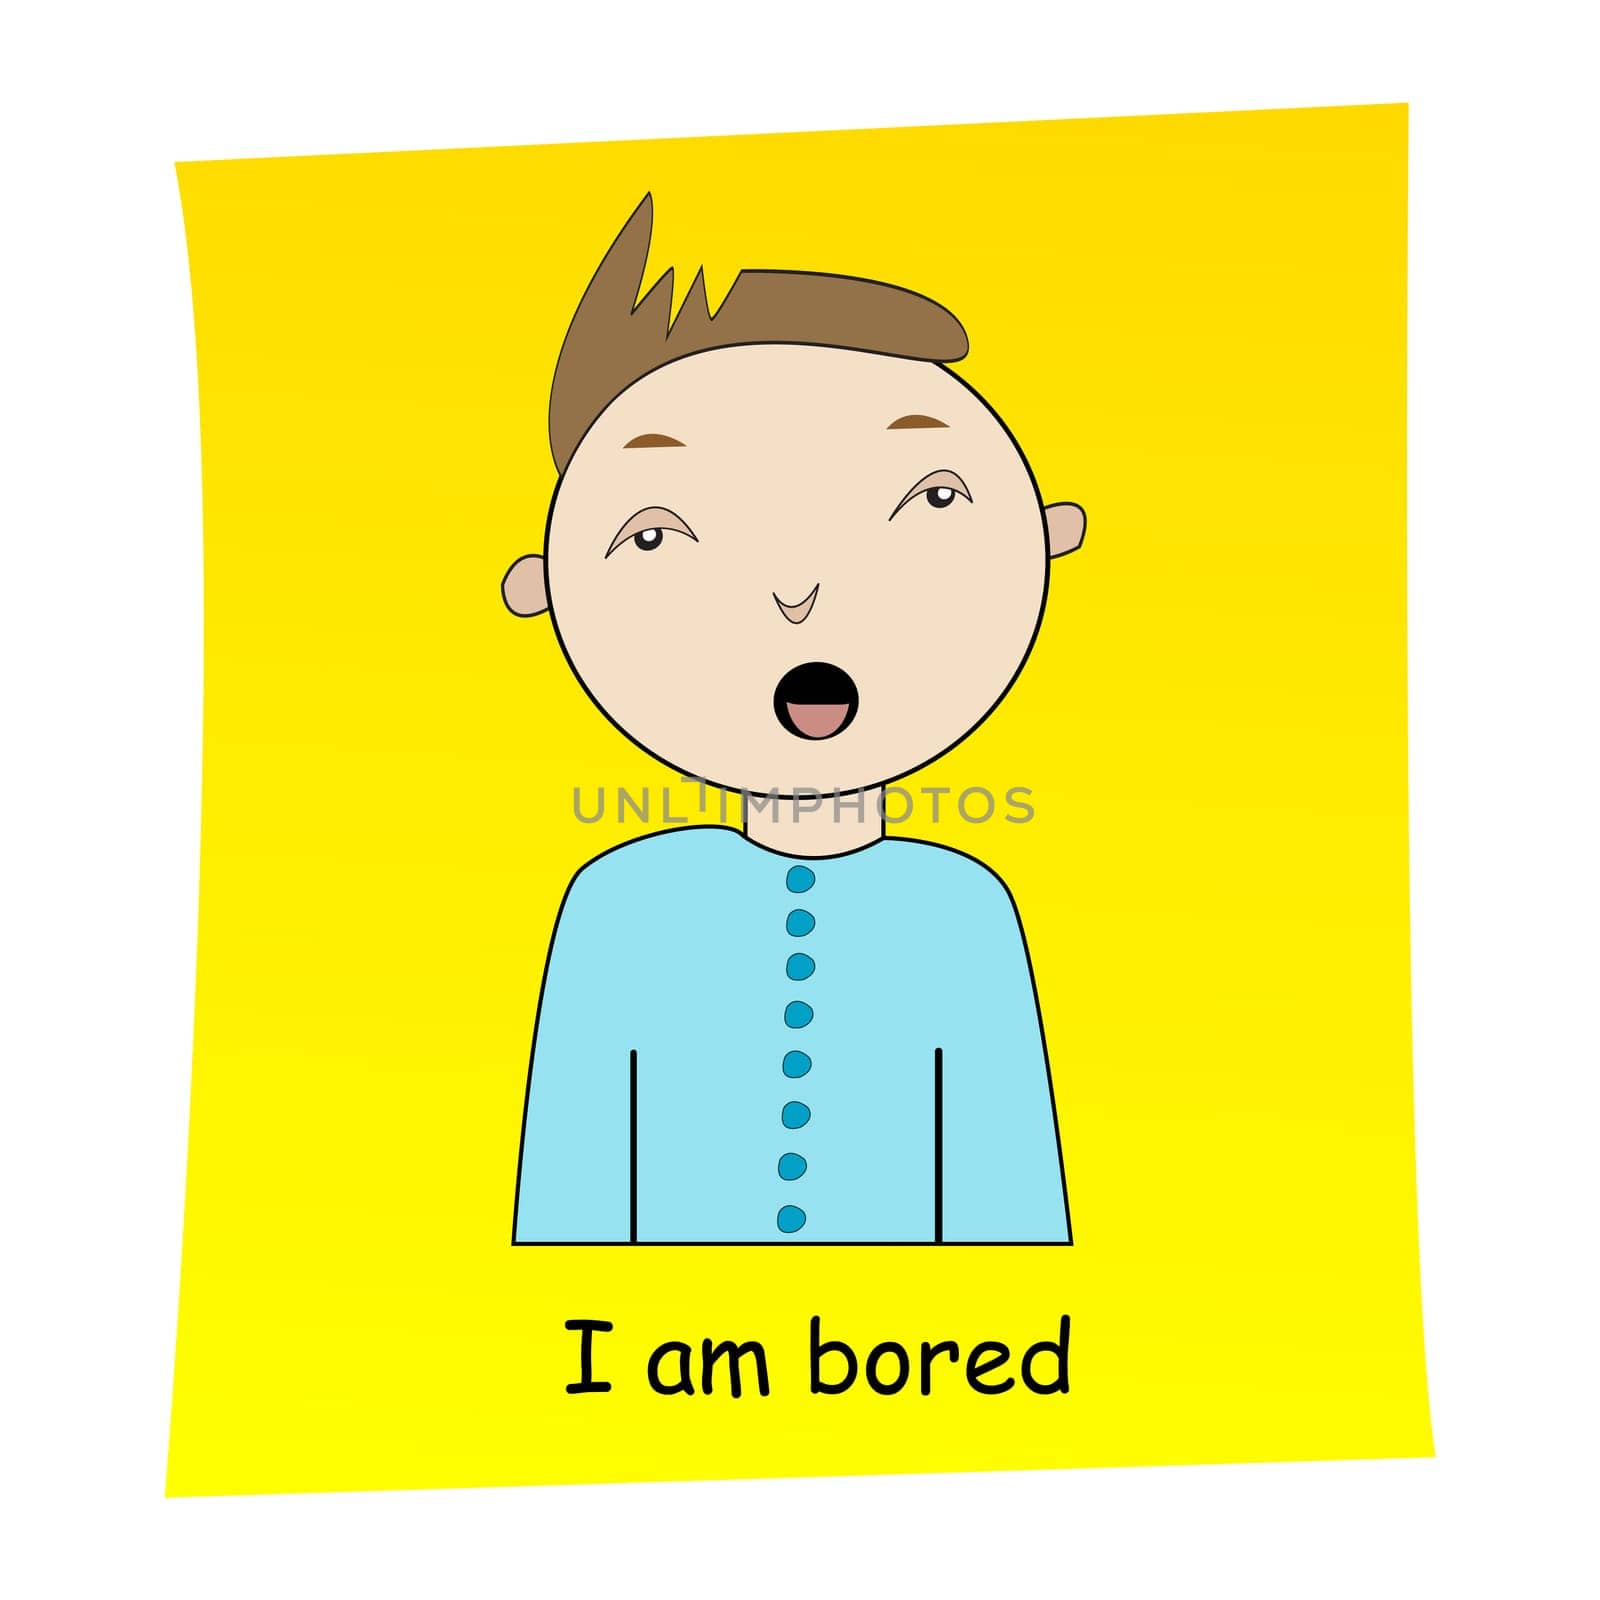 I am bored concept.Cartoon hand drawn boy with bored expression